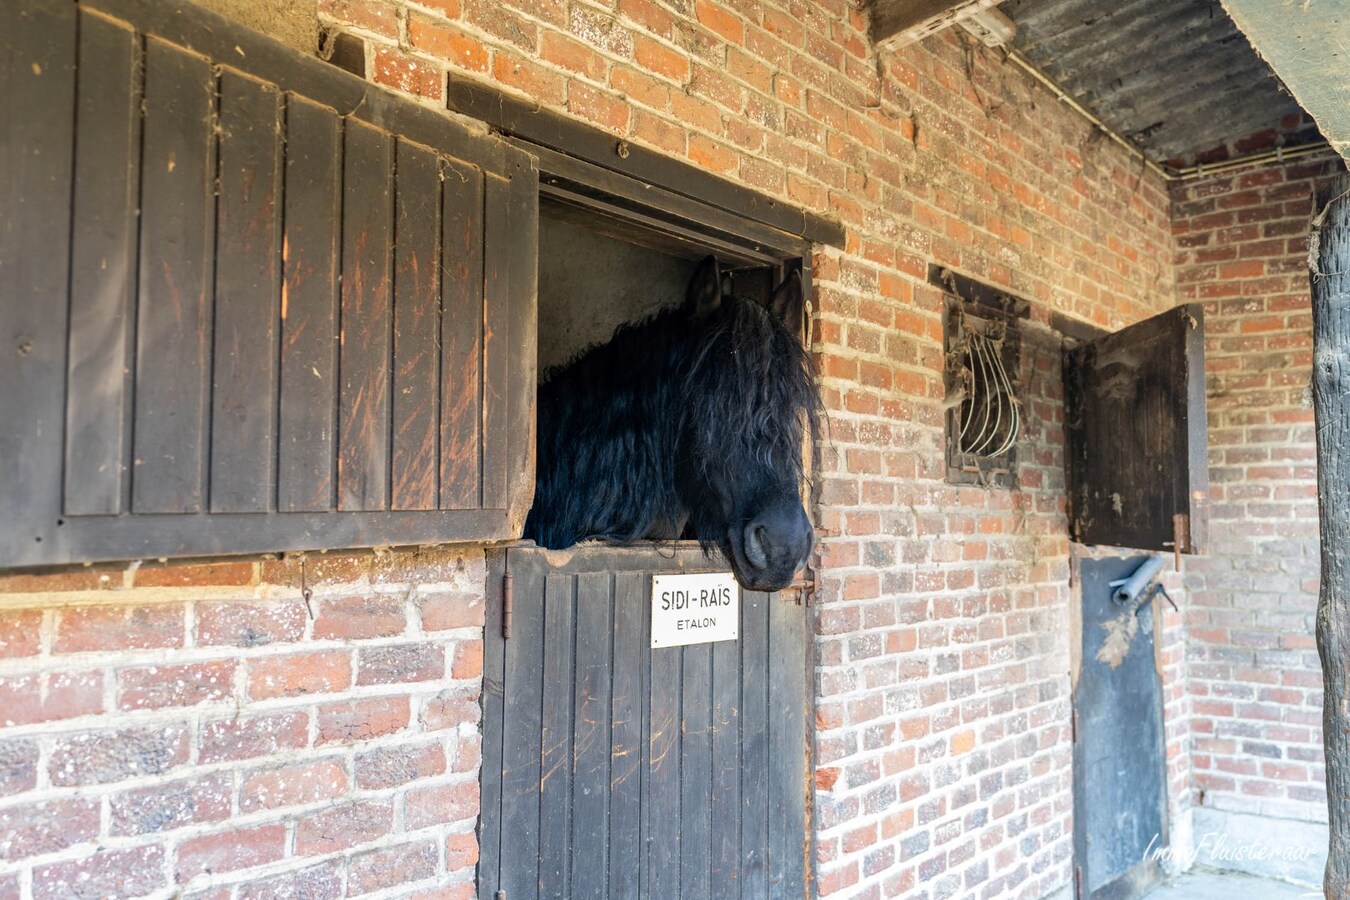 House with horse accommodation/ riding school on approx. 1ha in Mollem (Asse; Flemish Brabant) 